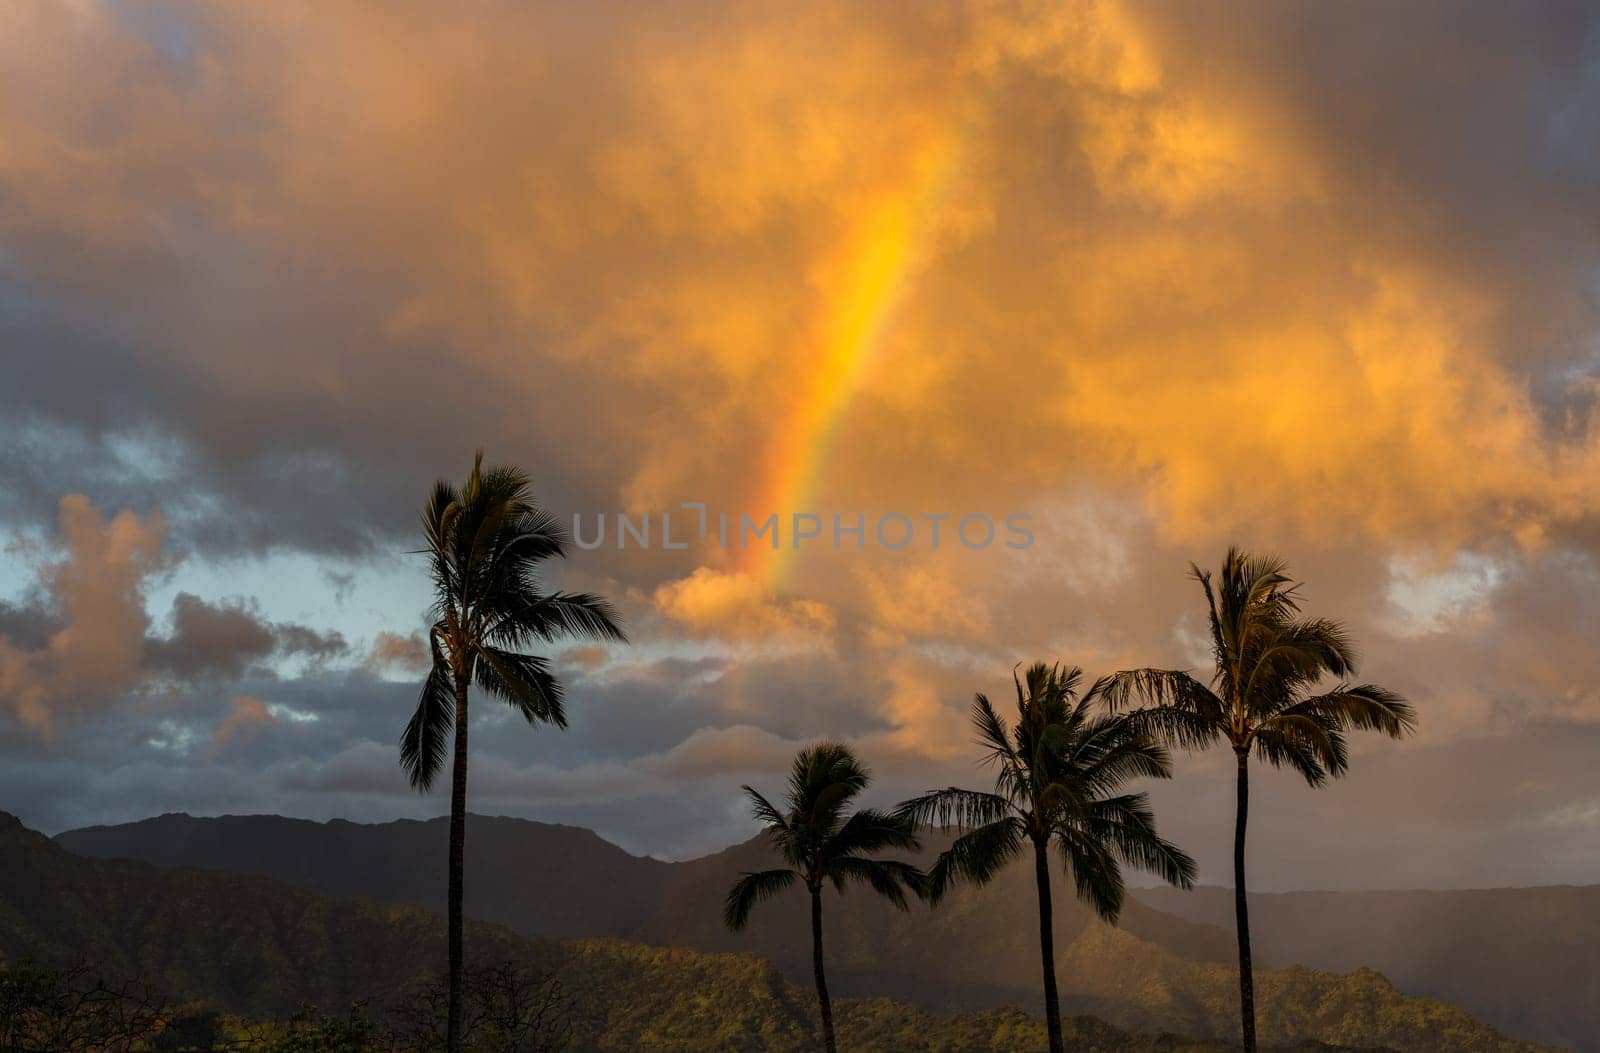 Rainbow over Hanalei mountains from Princeville Kauai by steheap